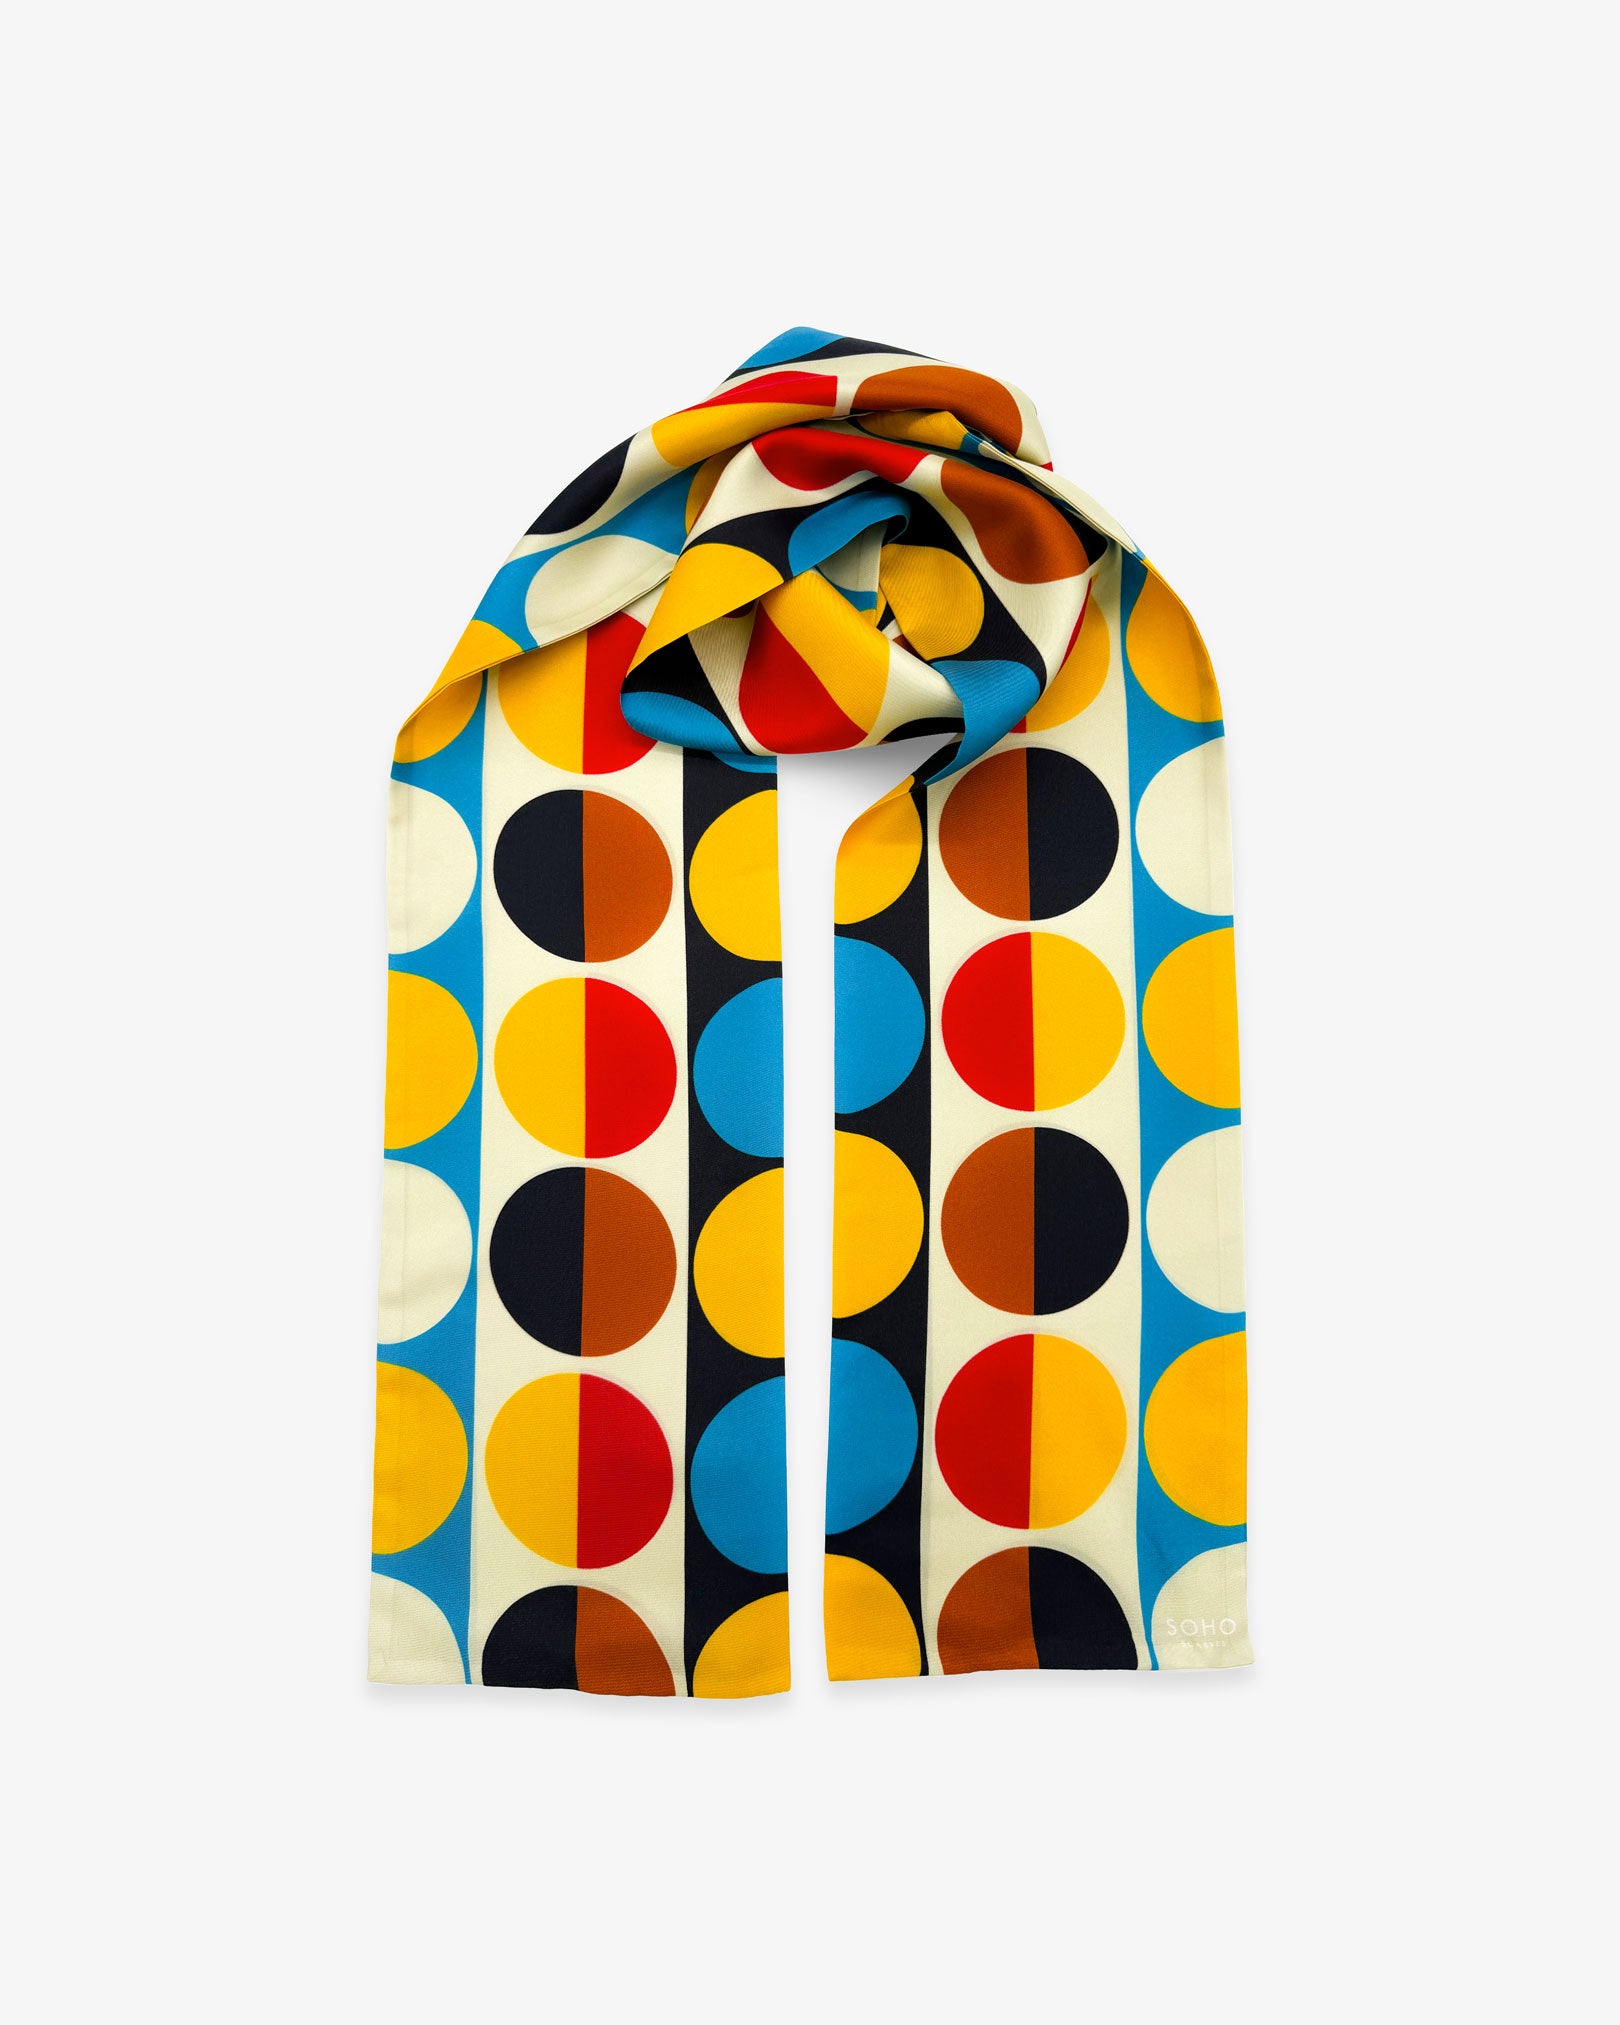 The 'Weimar' Bauhaus-inspired silk scarf looped with both ends parallel to effectively display the full repeat pattern of multicoloured semicircular discs.